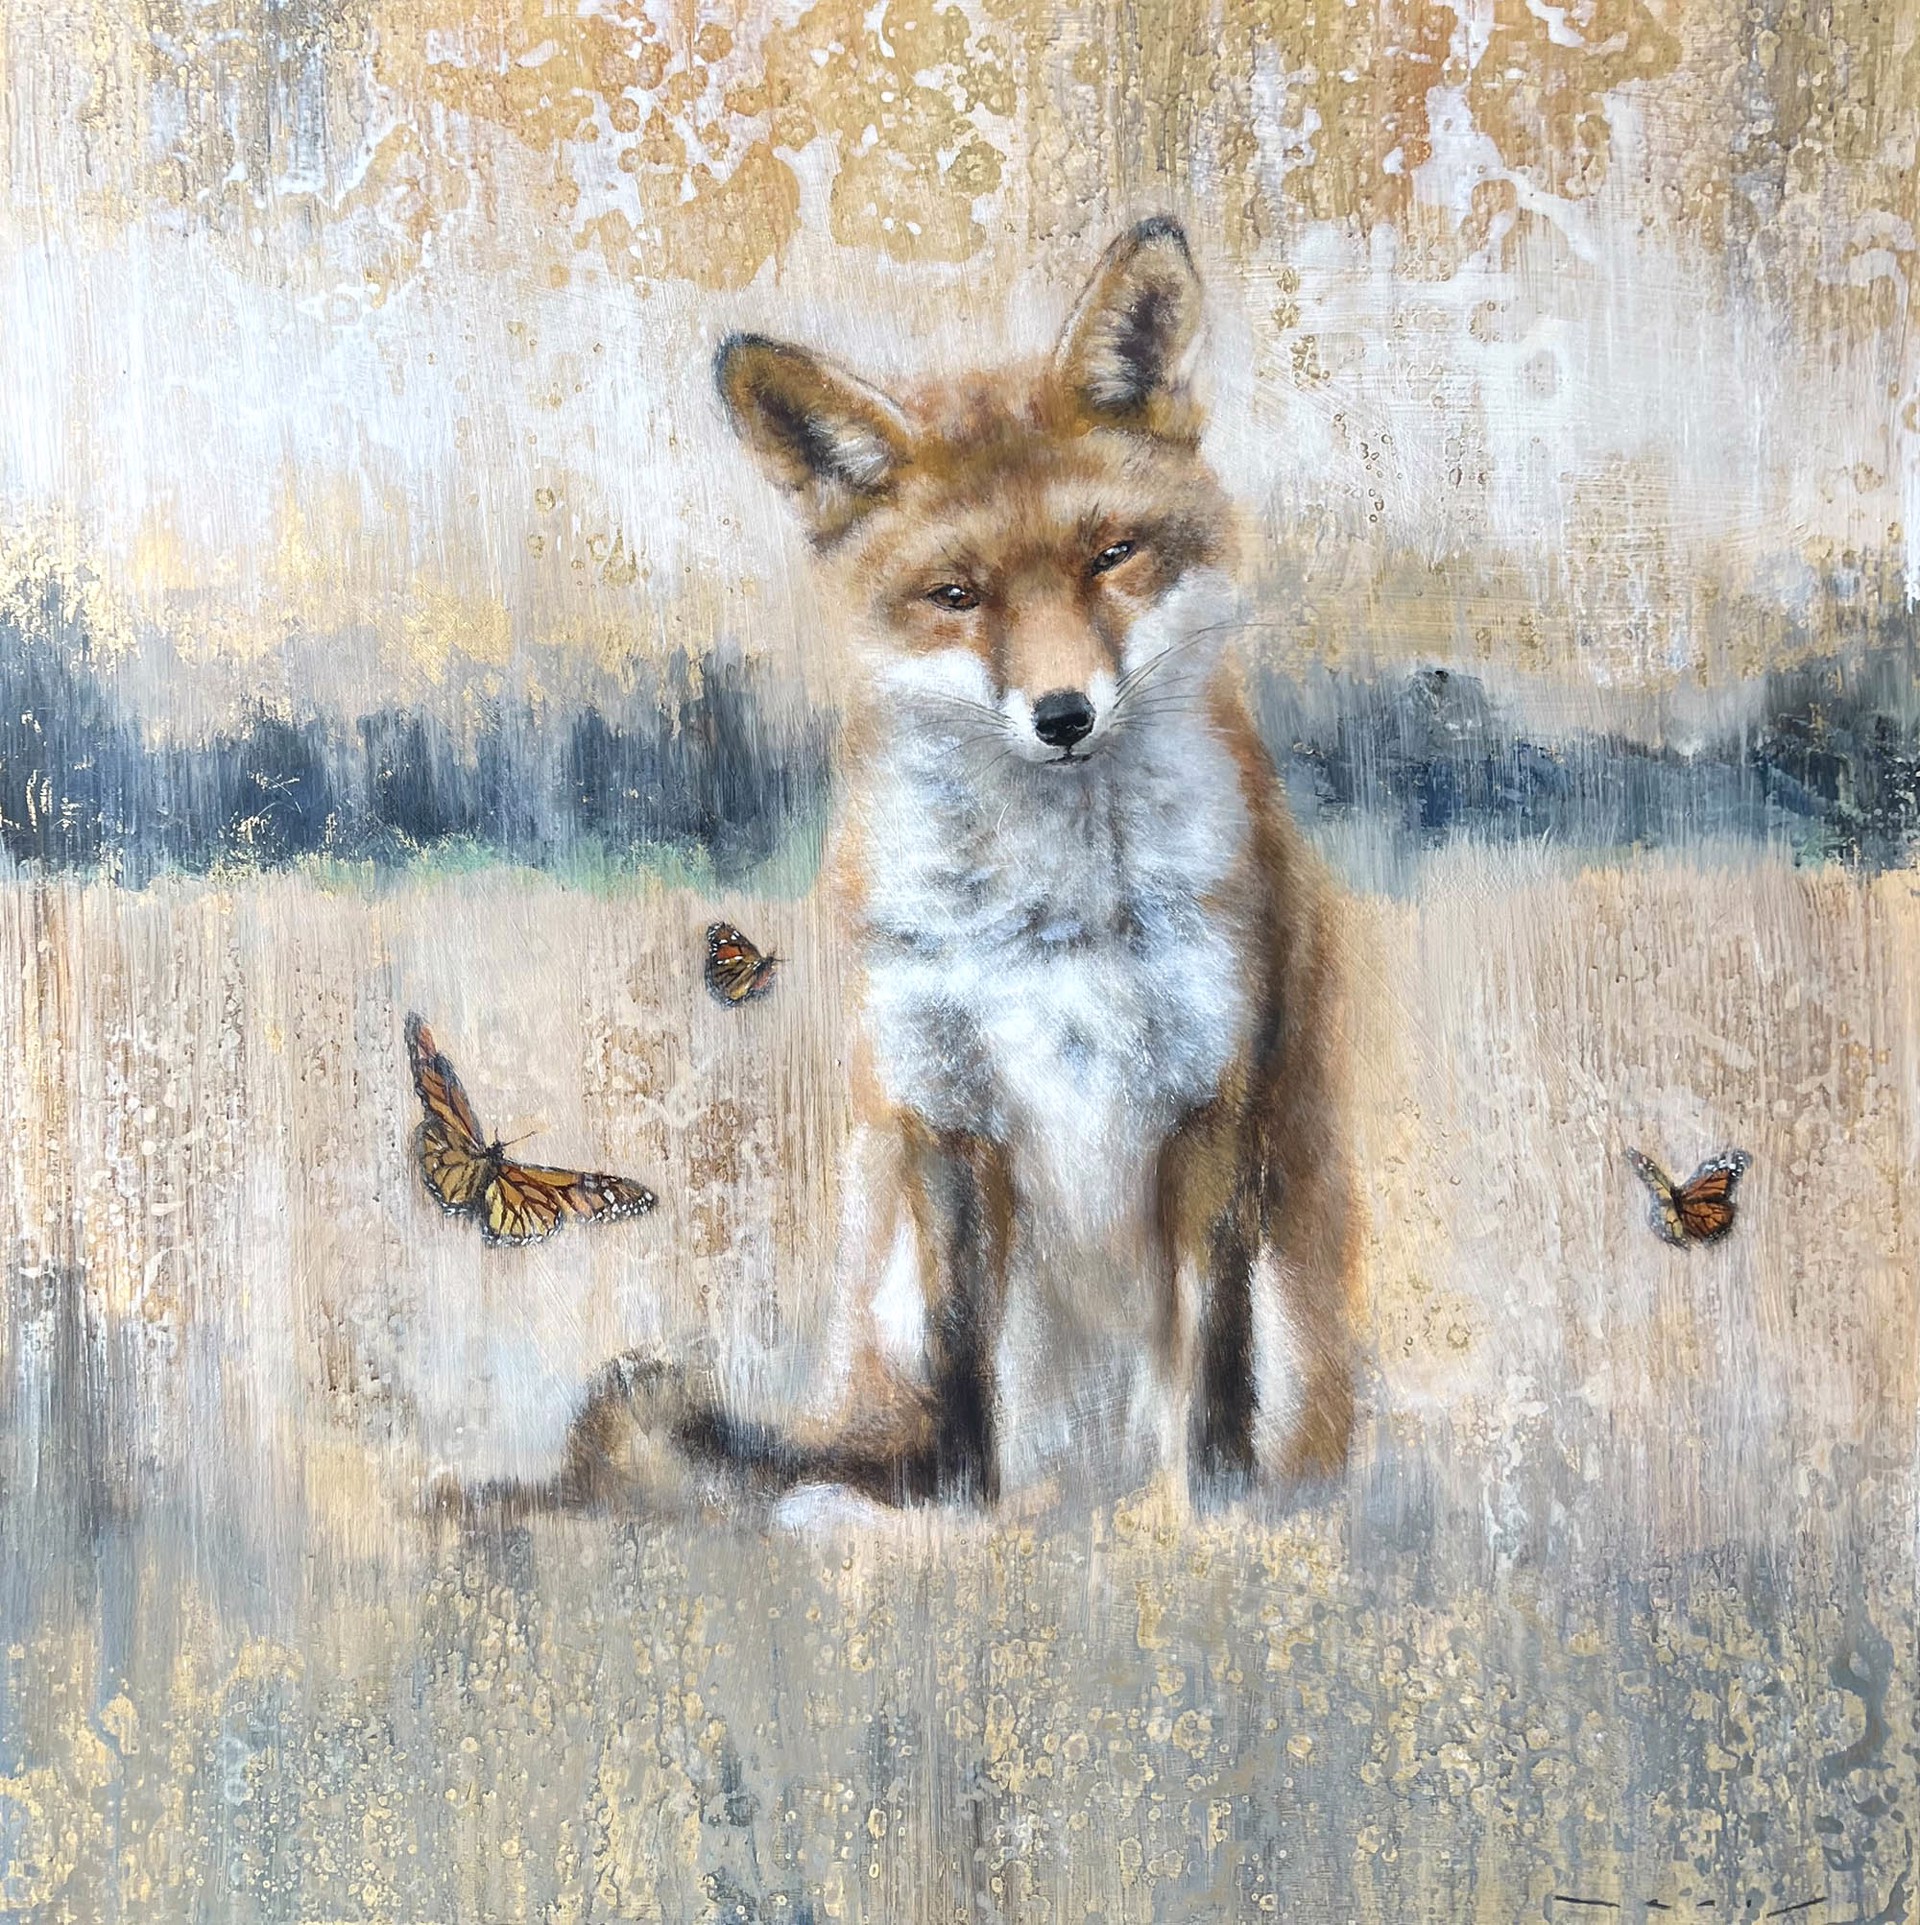 Original Mixed Media Painting By Nealy Riley Featuring A Red Fox With Monarch Butterflies In A Field